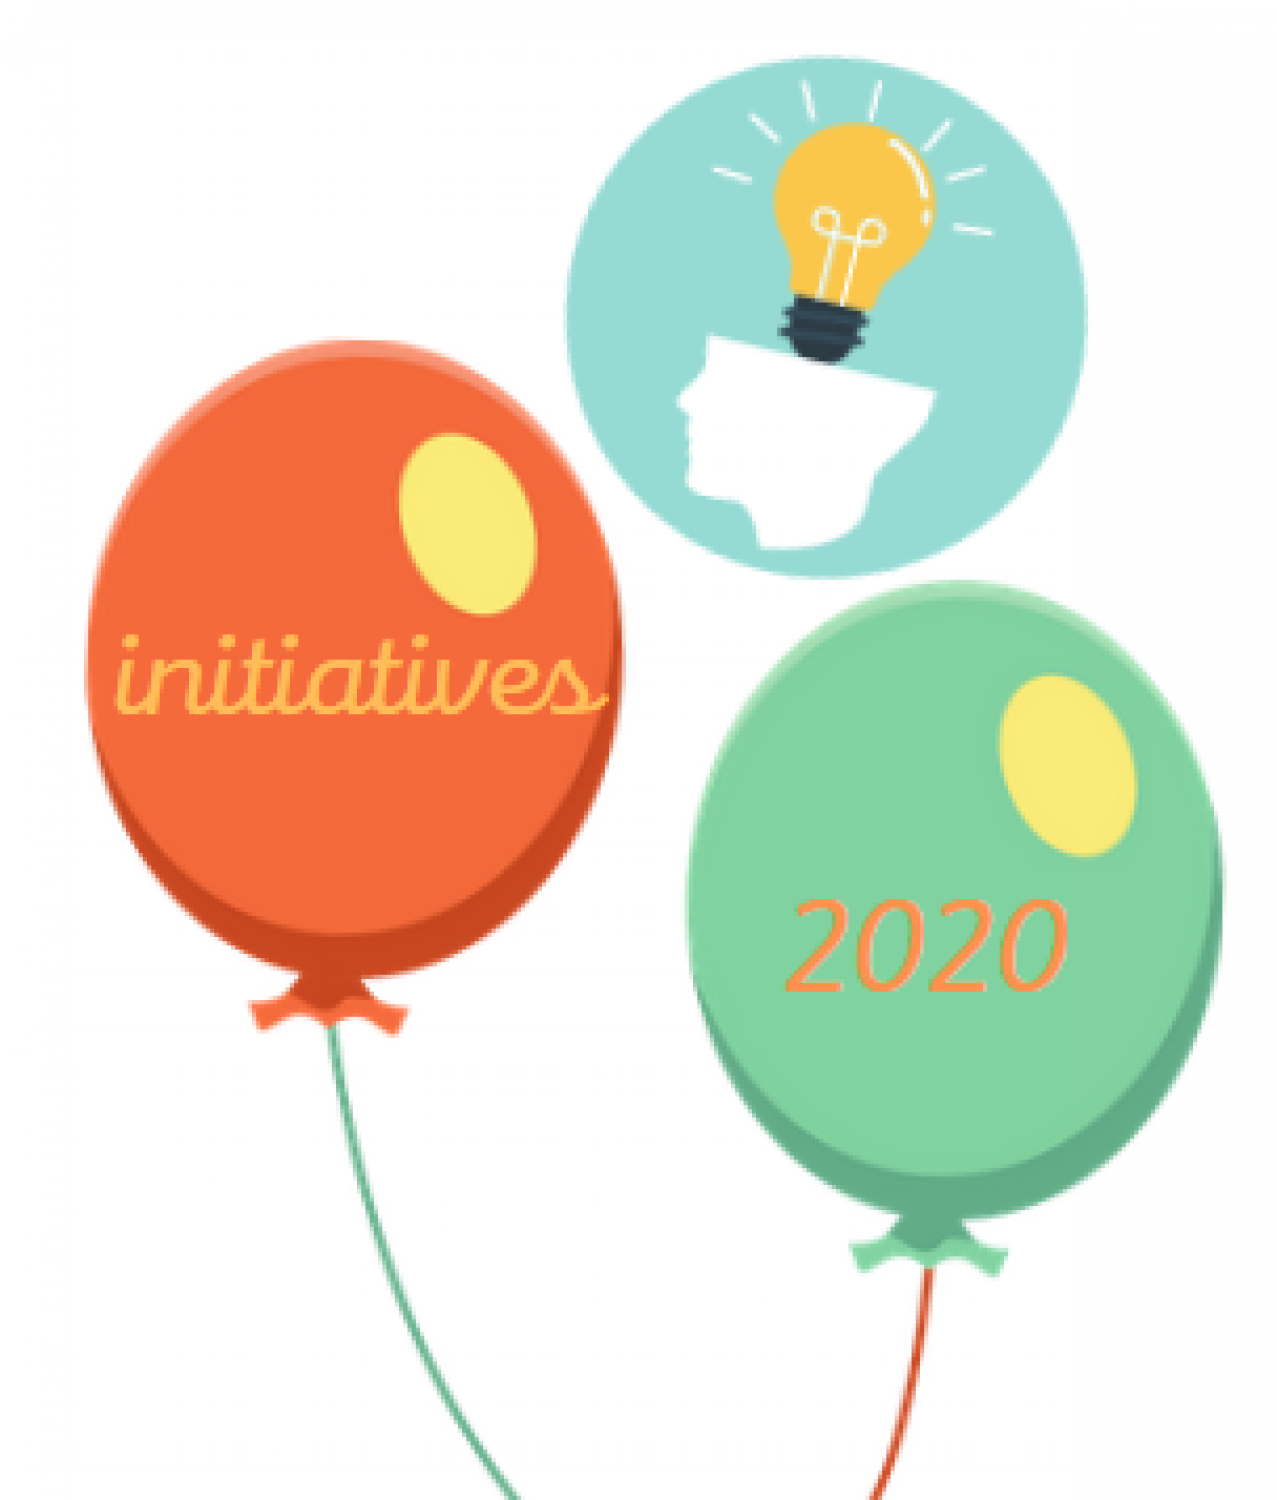 20201221115517-initiatives-2020.png